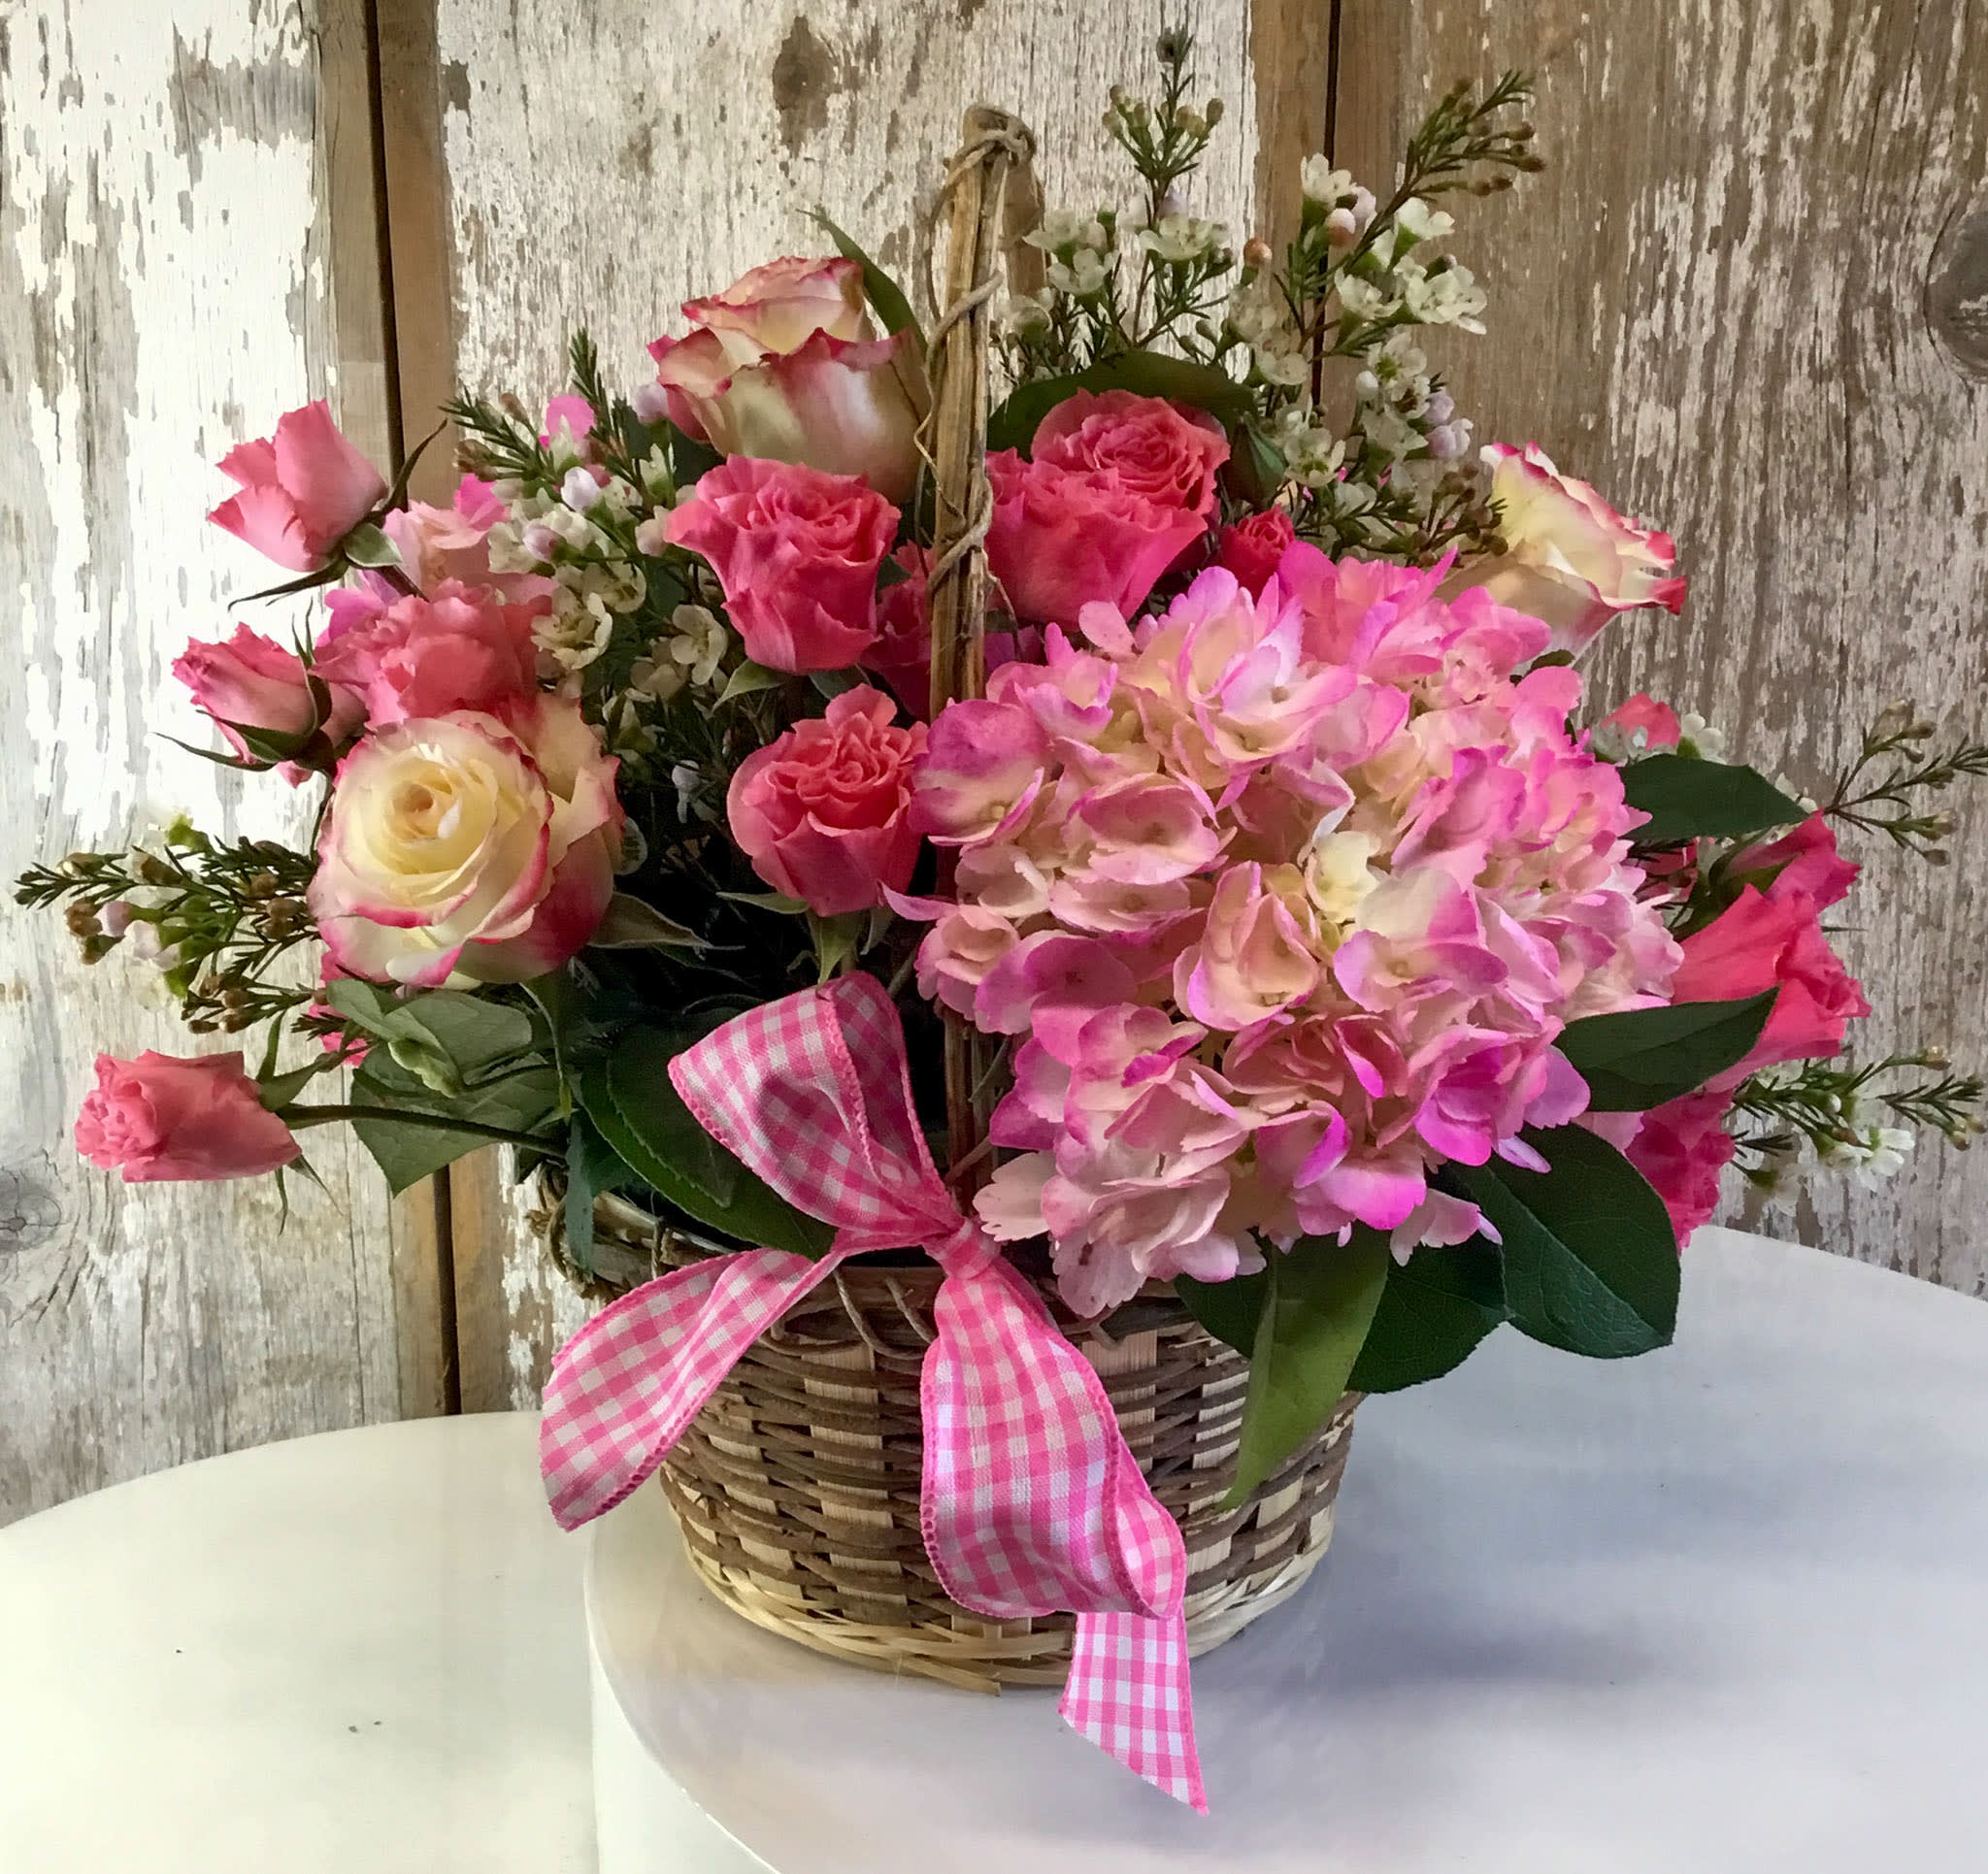 Pretty in Pink - White Daisies or Mums, Hot Pink and Light Pink and White Roses and Dusty Miller with Greens and Wax Flower in a Basket with Ribbon.